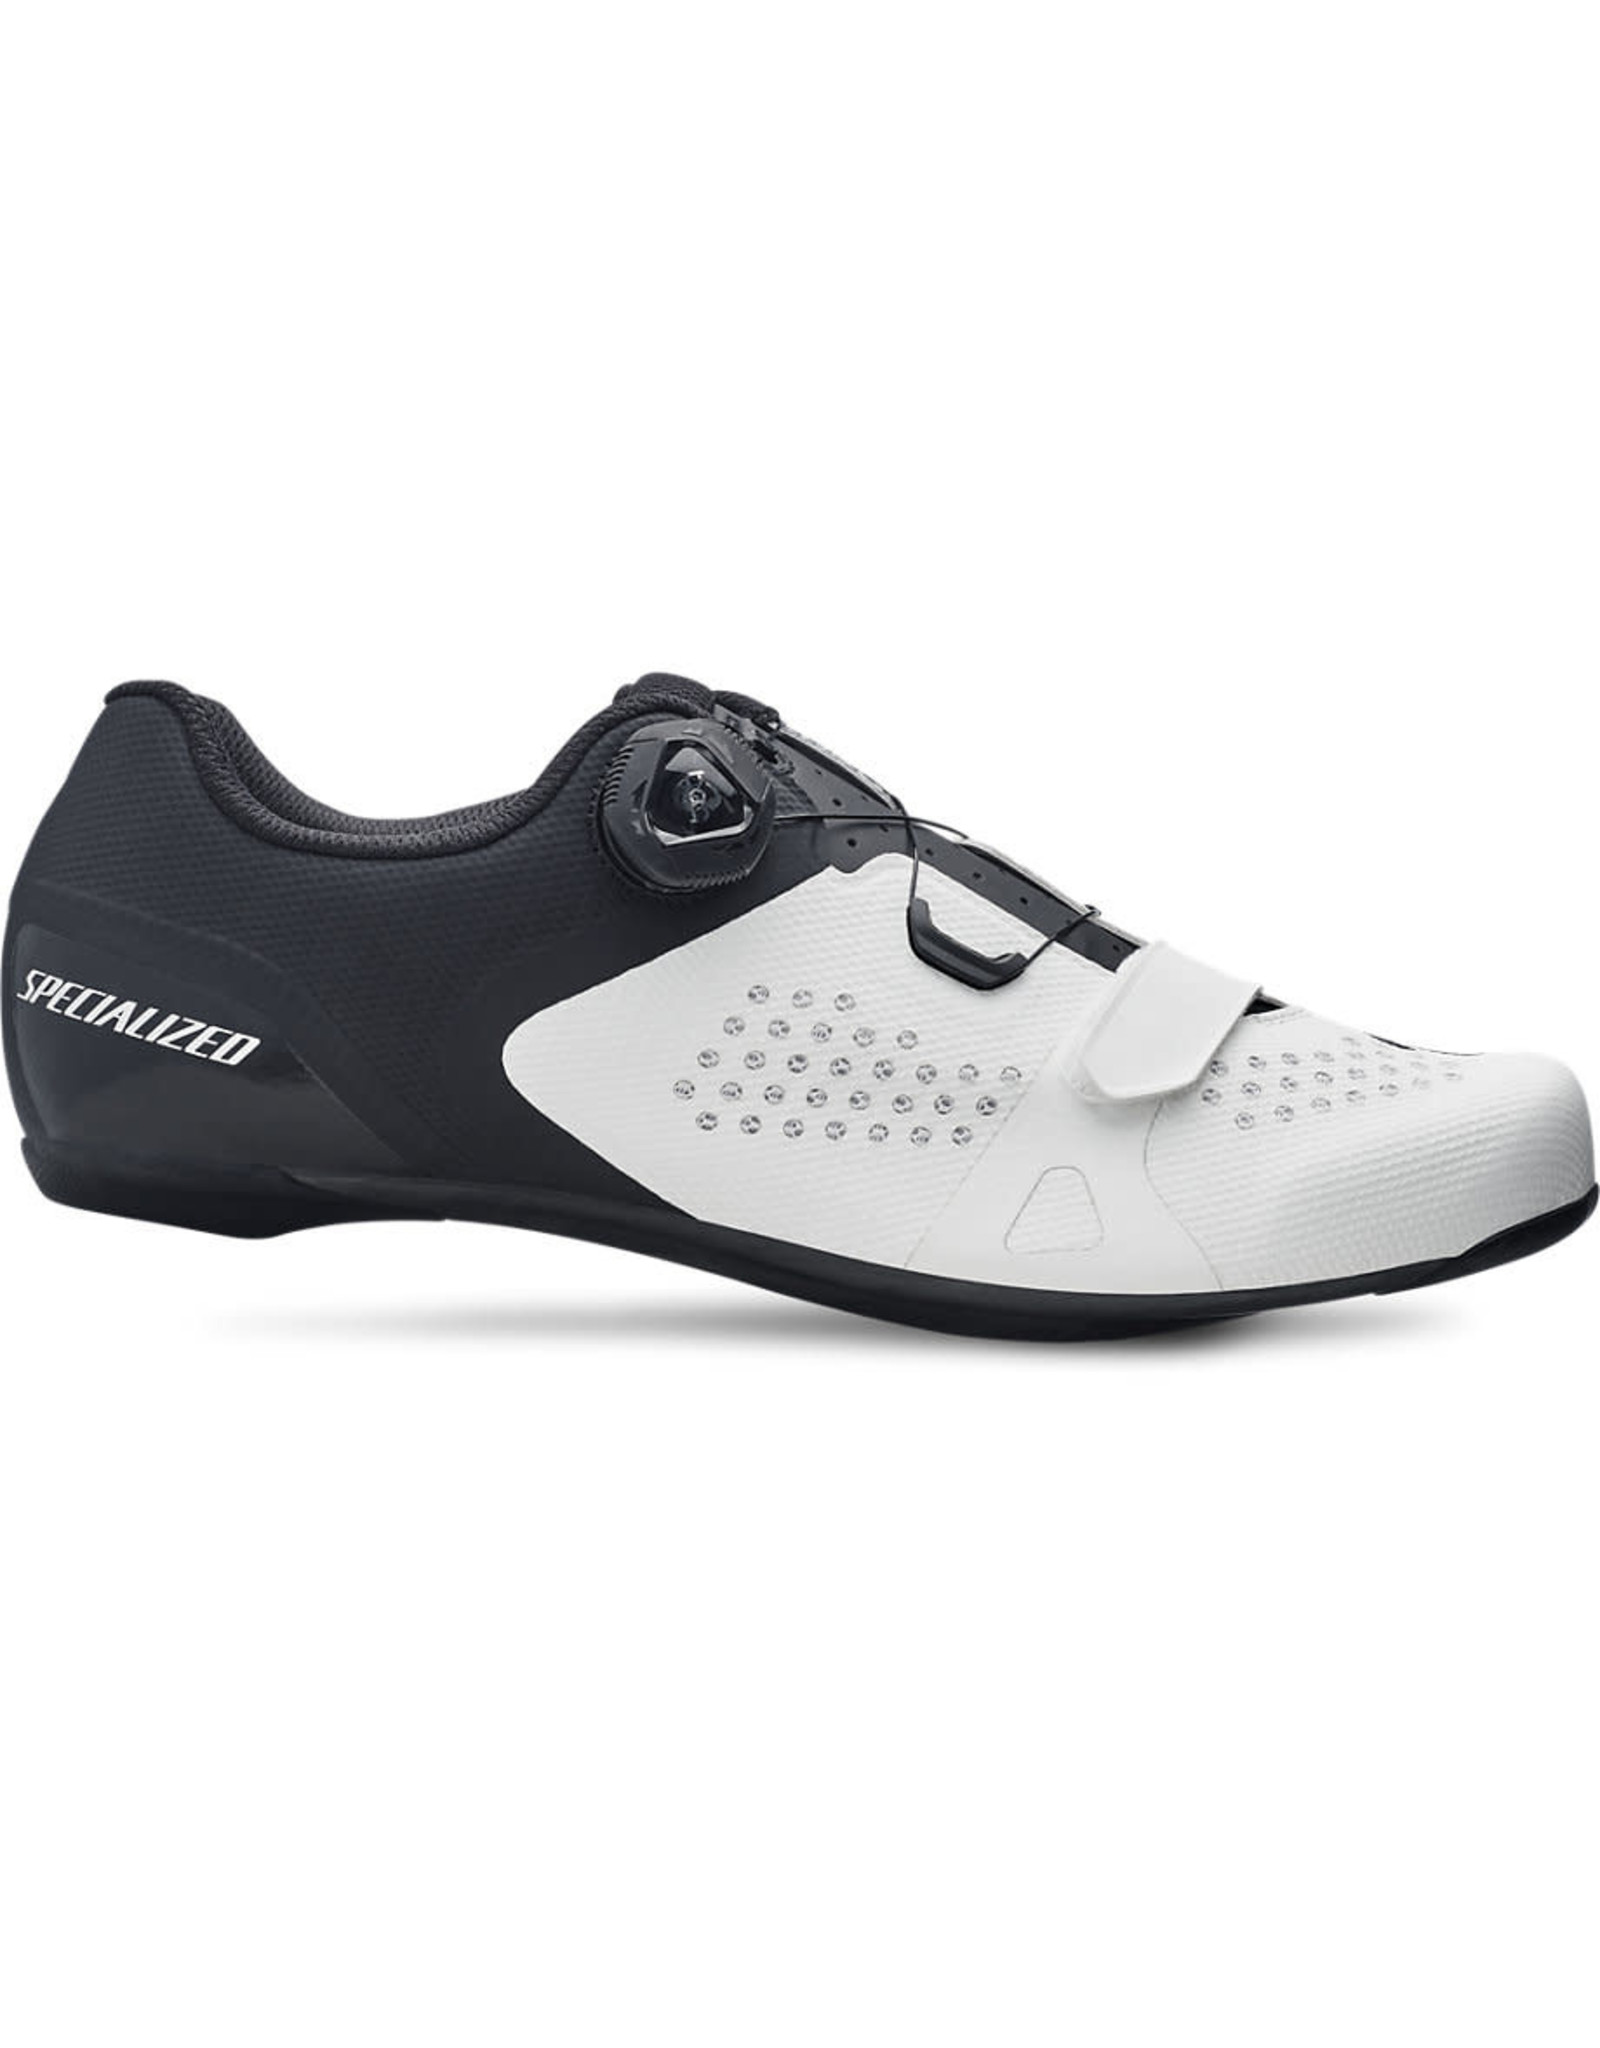 SPECIALIZED TORCH 2.0 ROAD SHOE